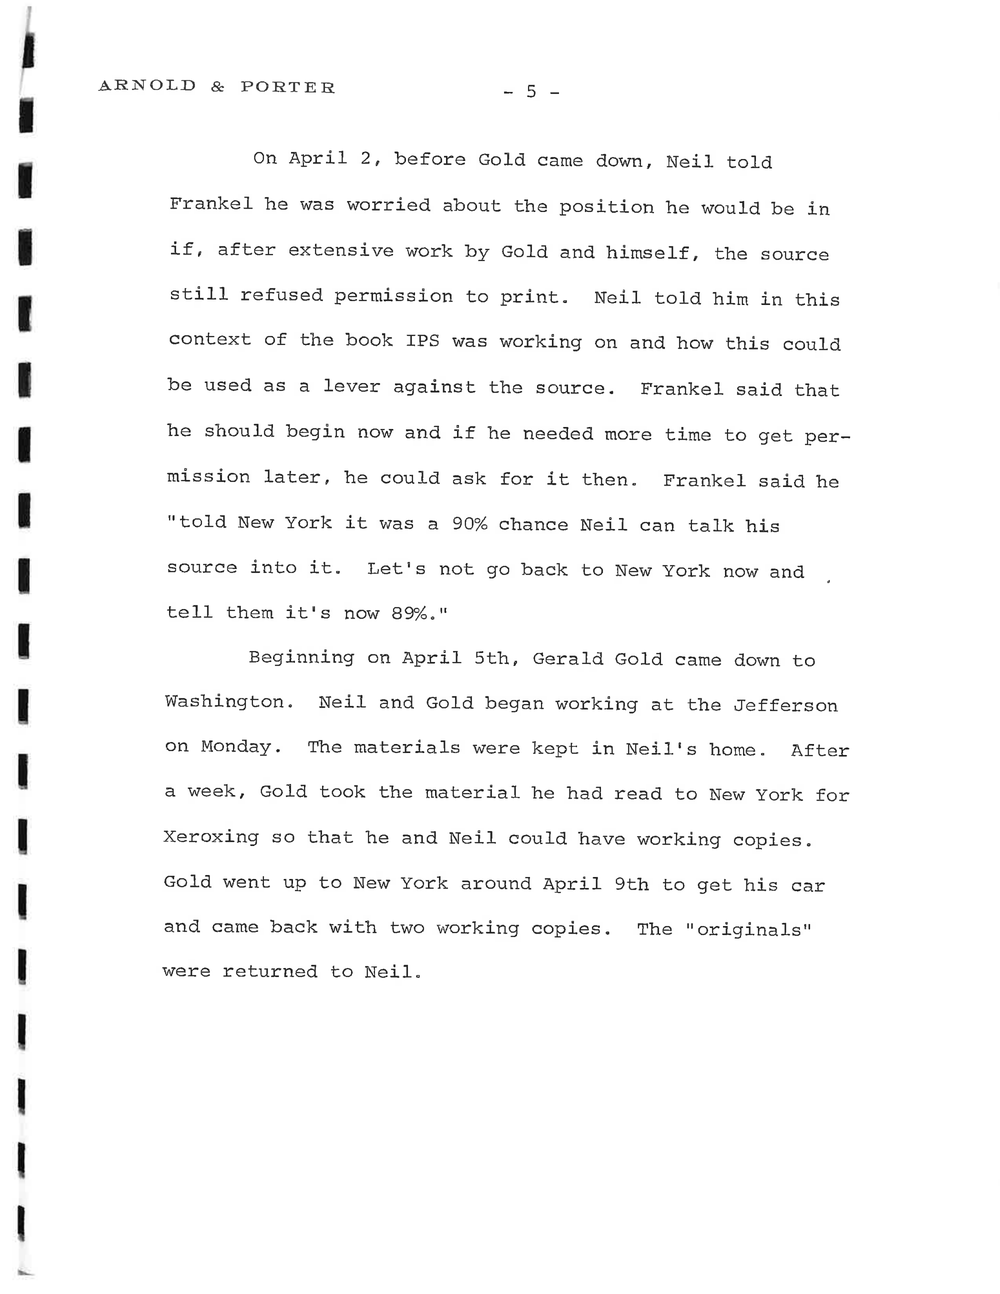 Page 5 from Rogovin Sheehan memo